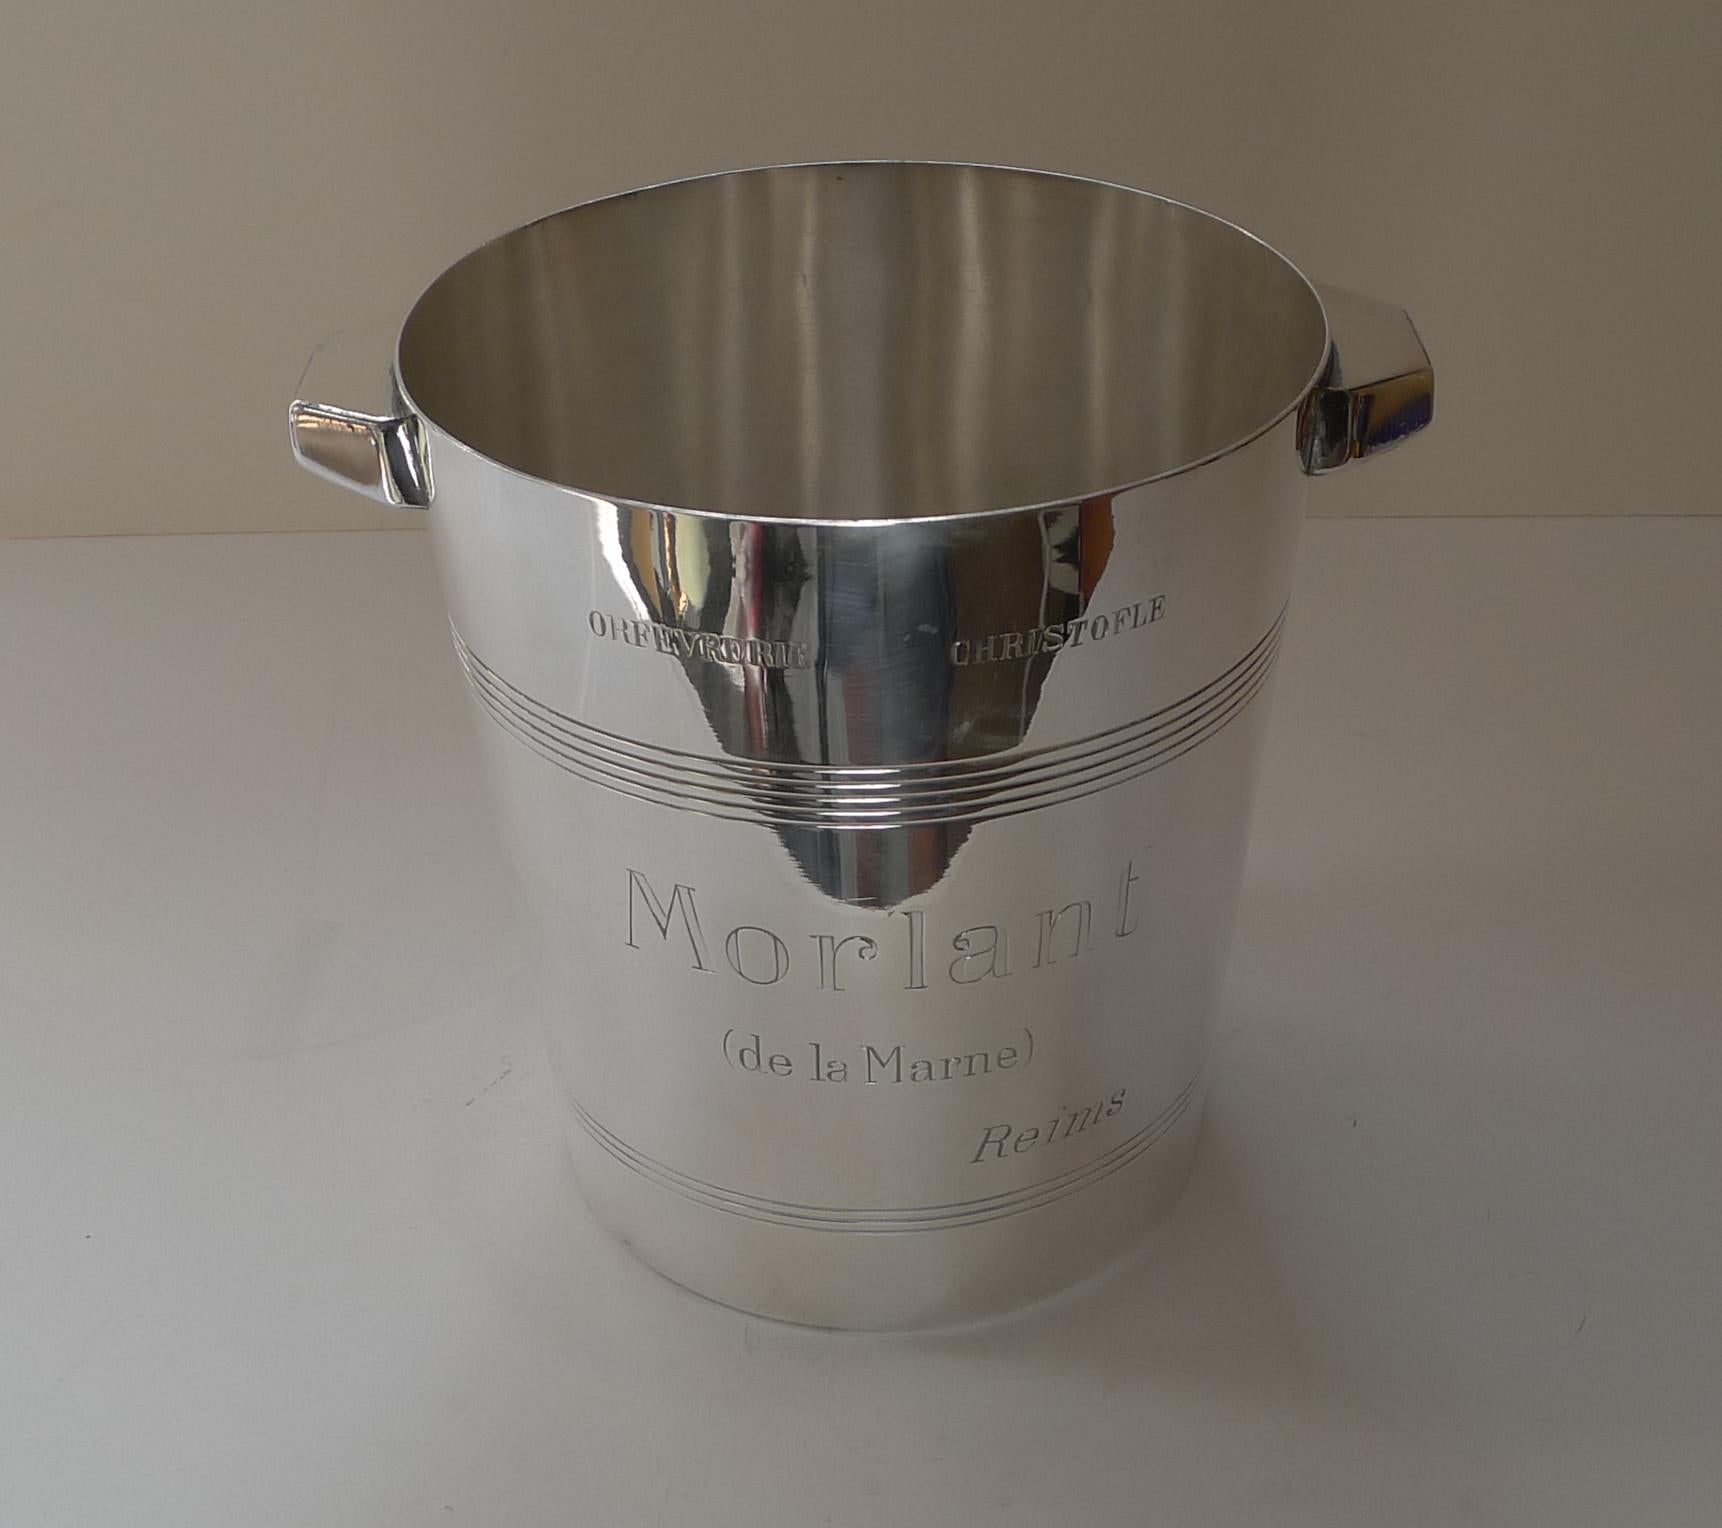 Silver Plate Orfevrerie Christofle Champagne Bucket for Morlant, Reims, C.1930